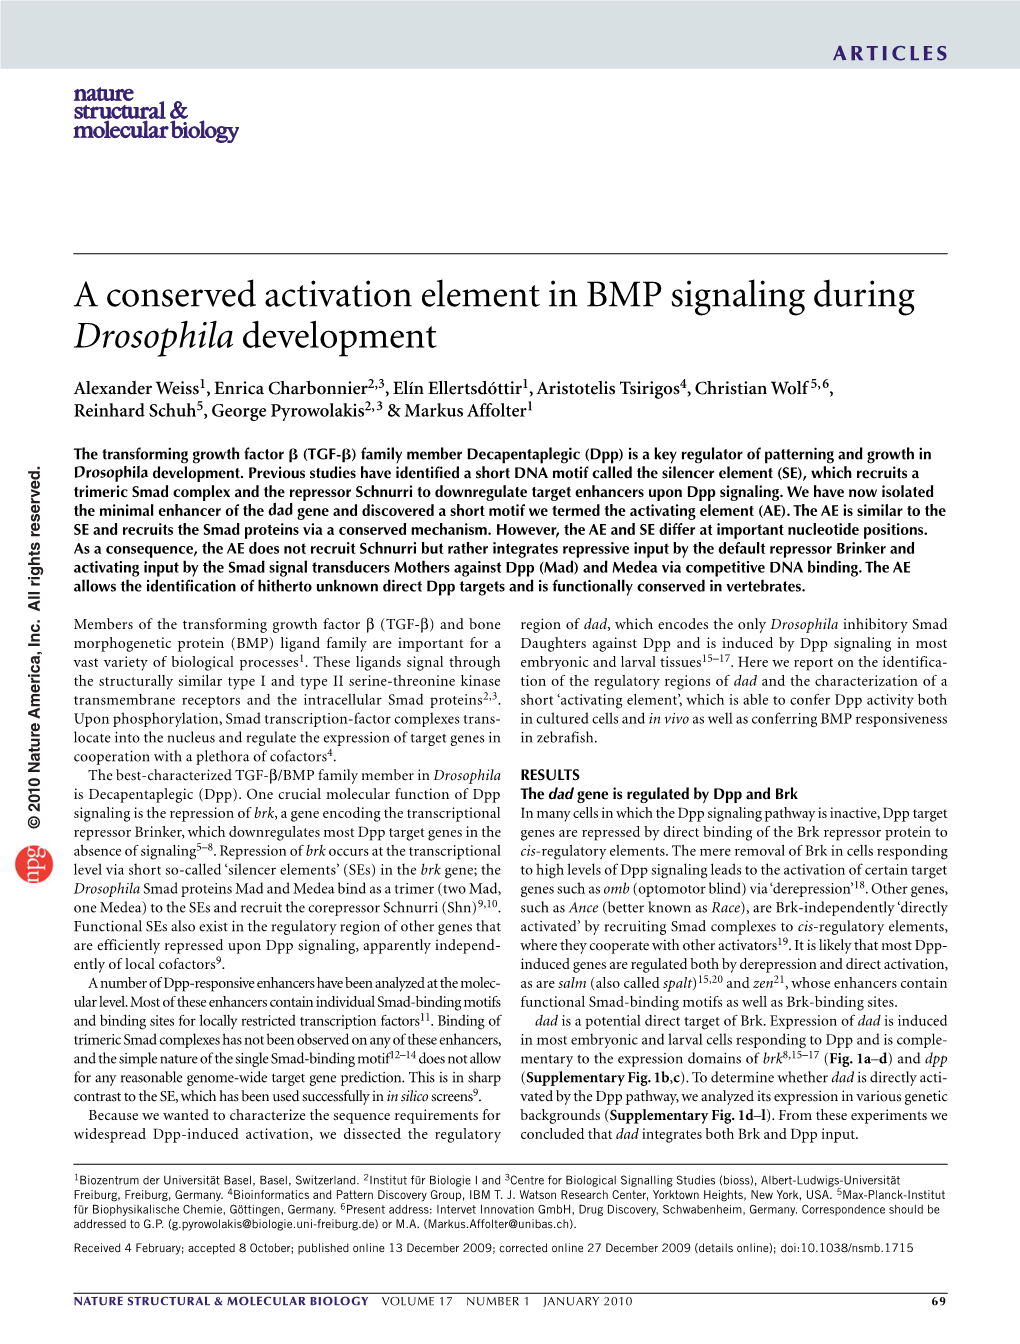 A Conserved Activation Element in BMP Signaling During Drosophila Development